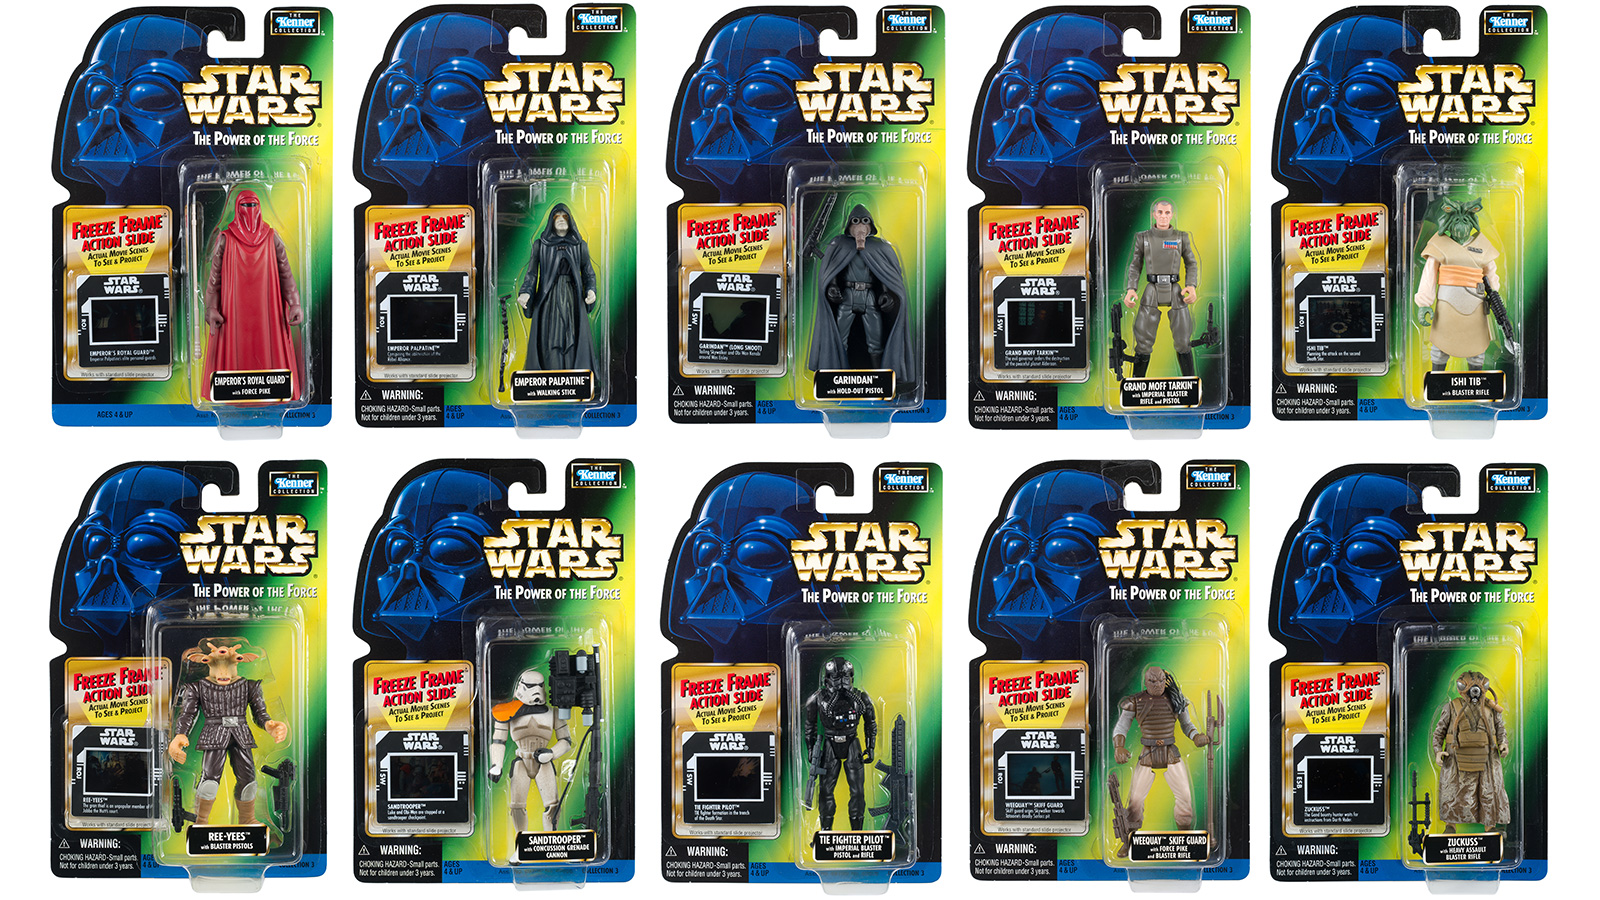 Photo Gallery Update - All 52 The Power Of The Force Freeze Frame 3.75-Inch Figures Added